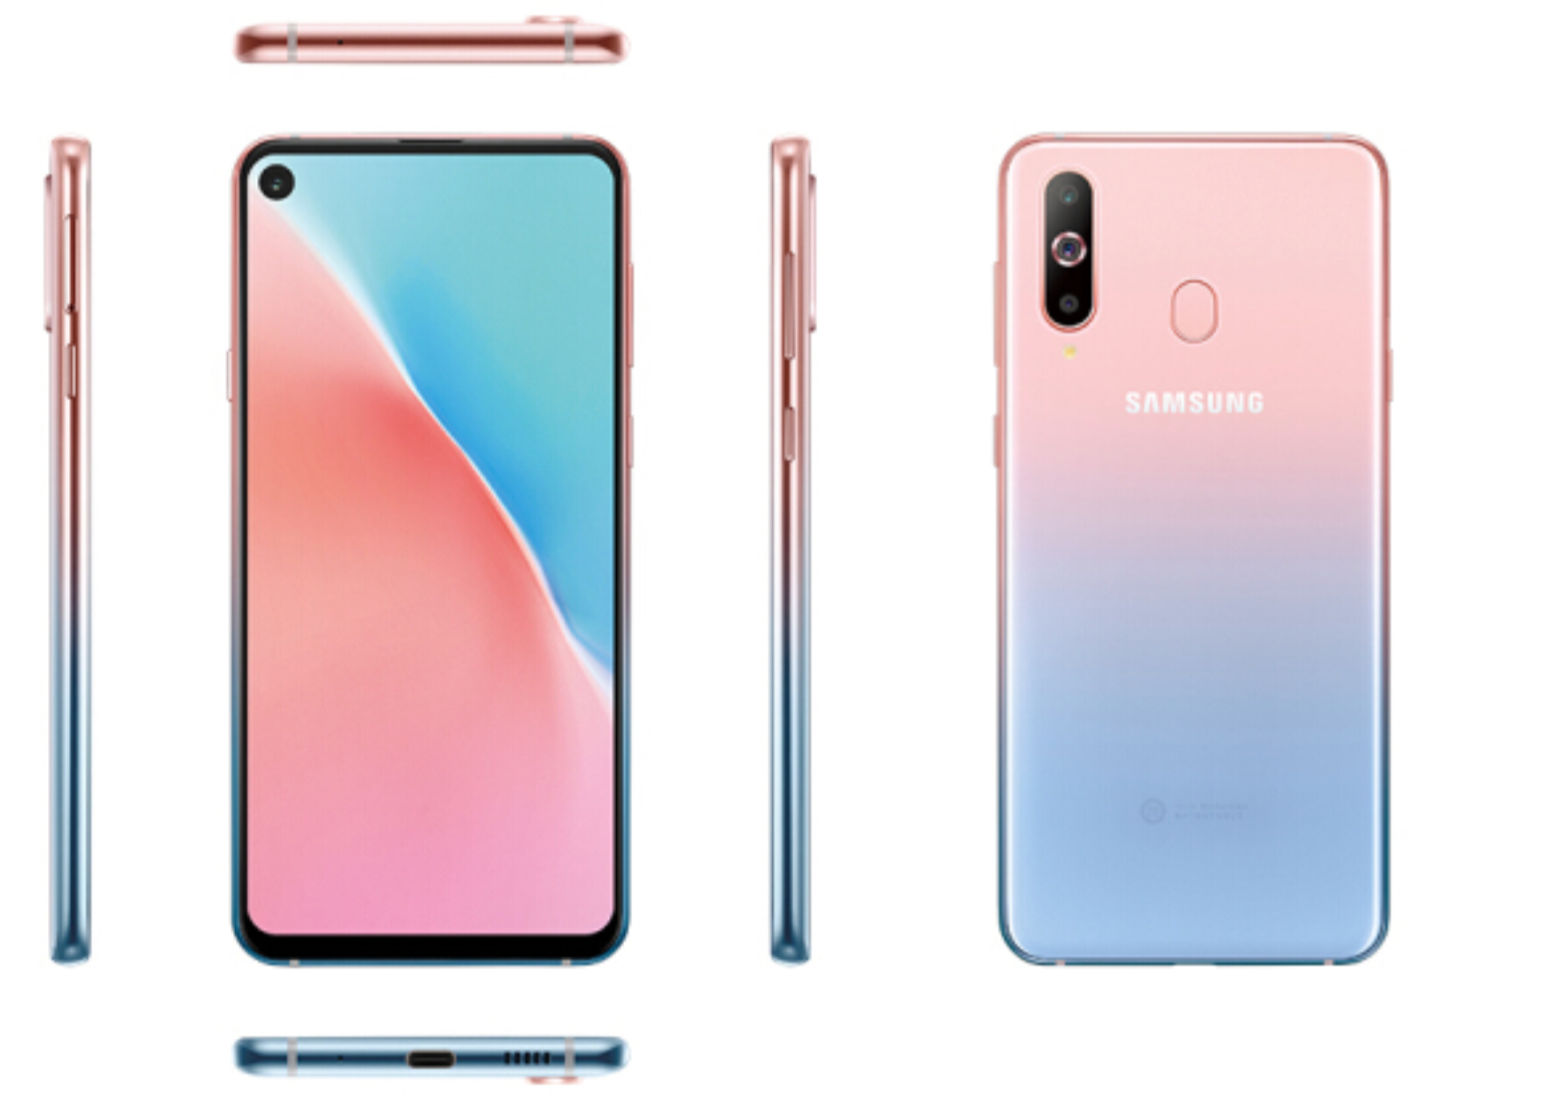 Samsung Galaxy A8s Unicorn Edition with two new gradient colours launched in China | 91mobiles.com